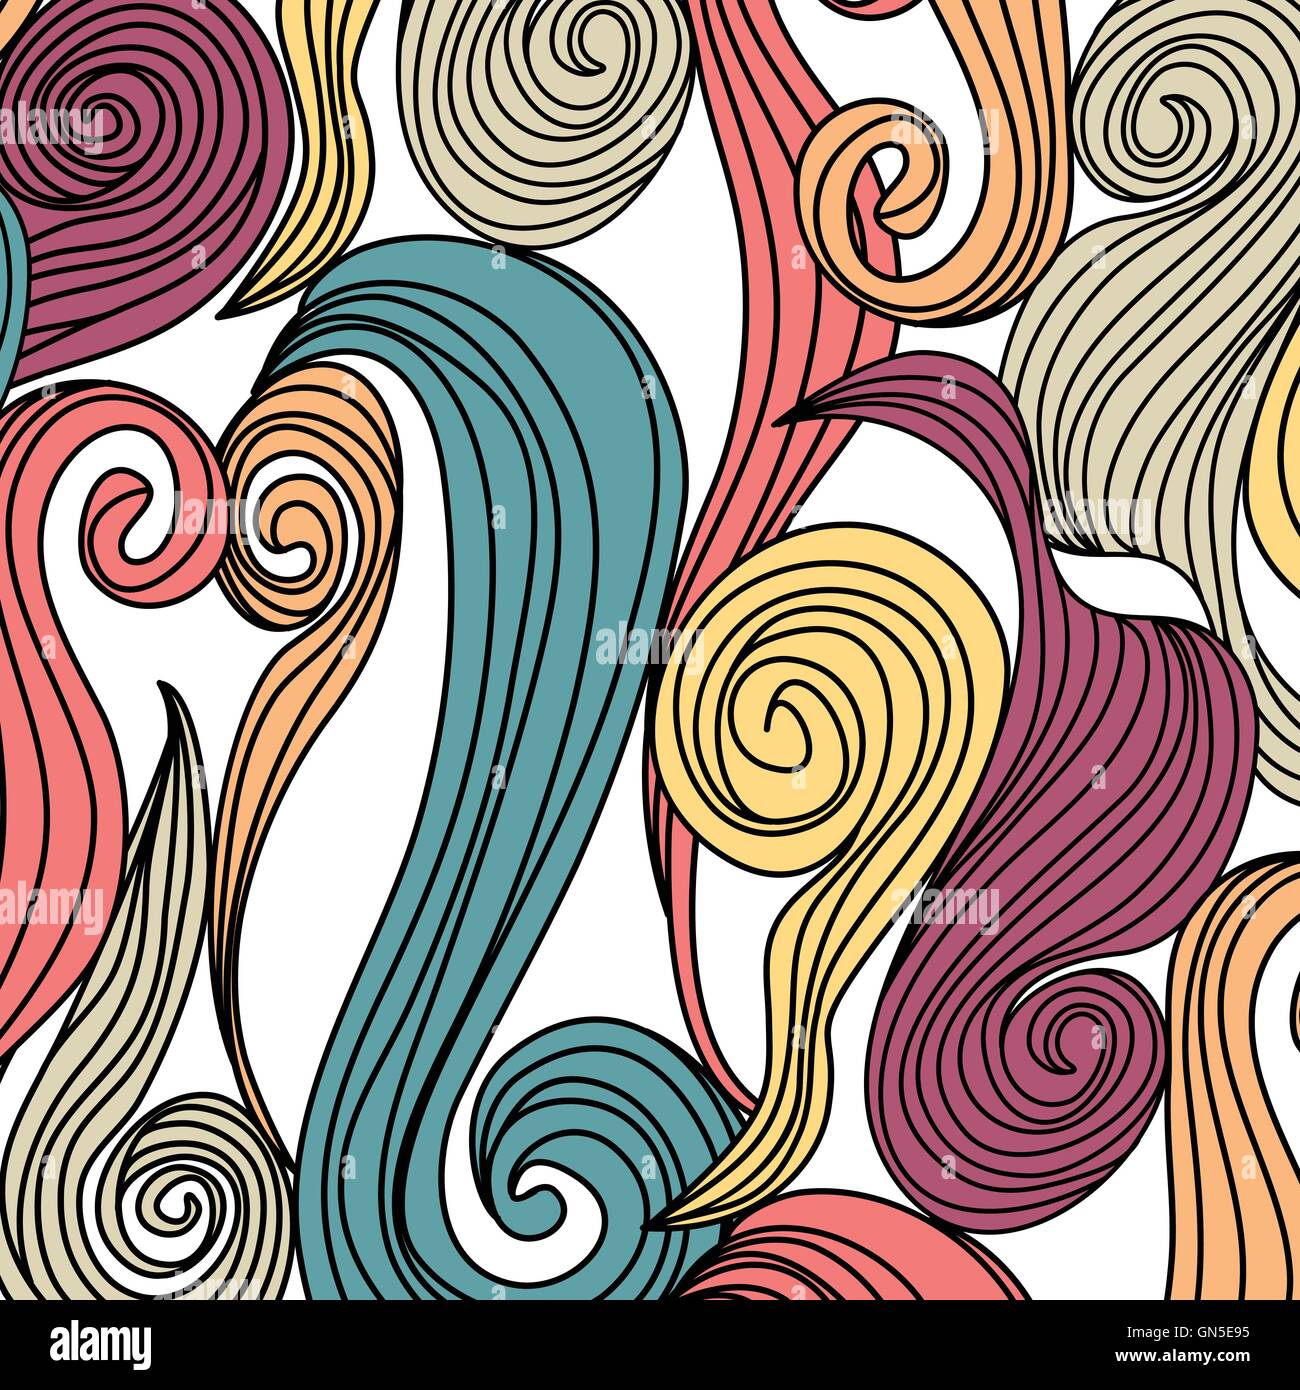 Abstract hand-drawn pattern with waves Stock Vector